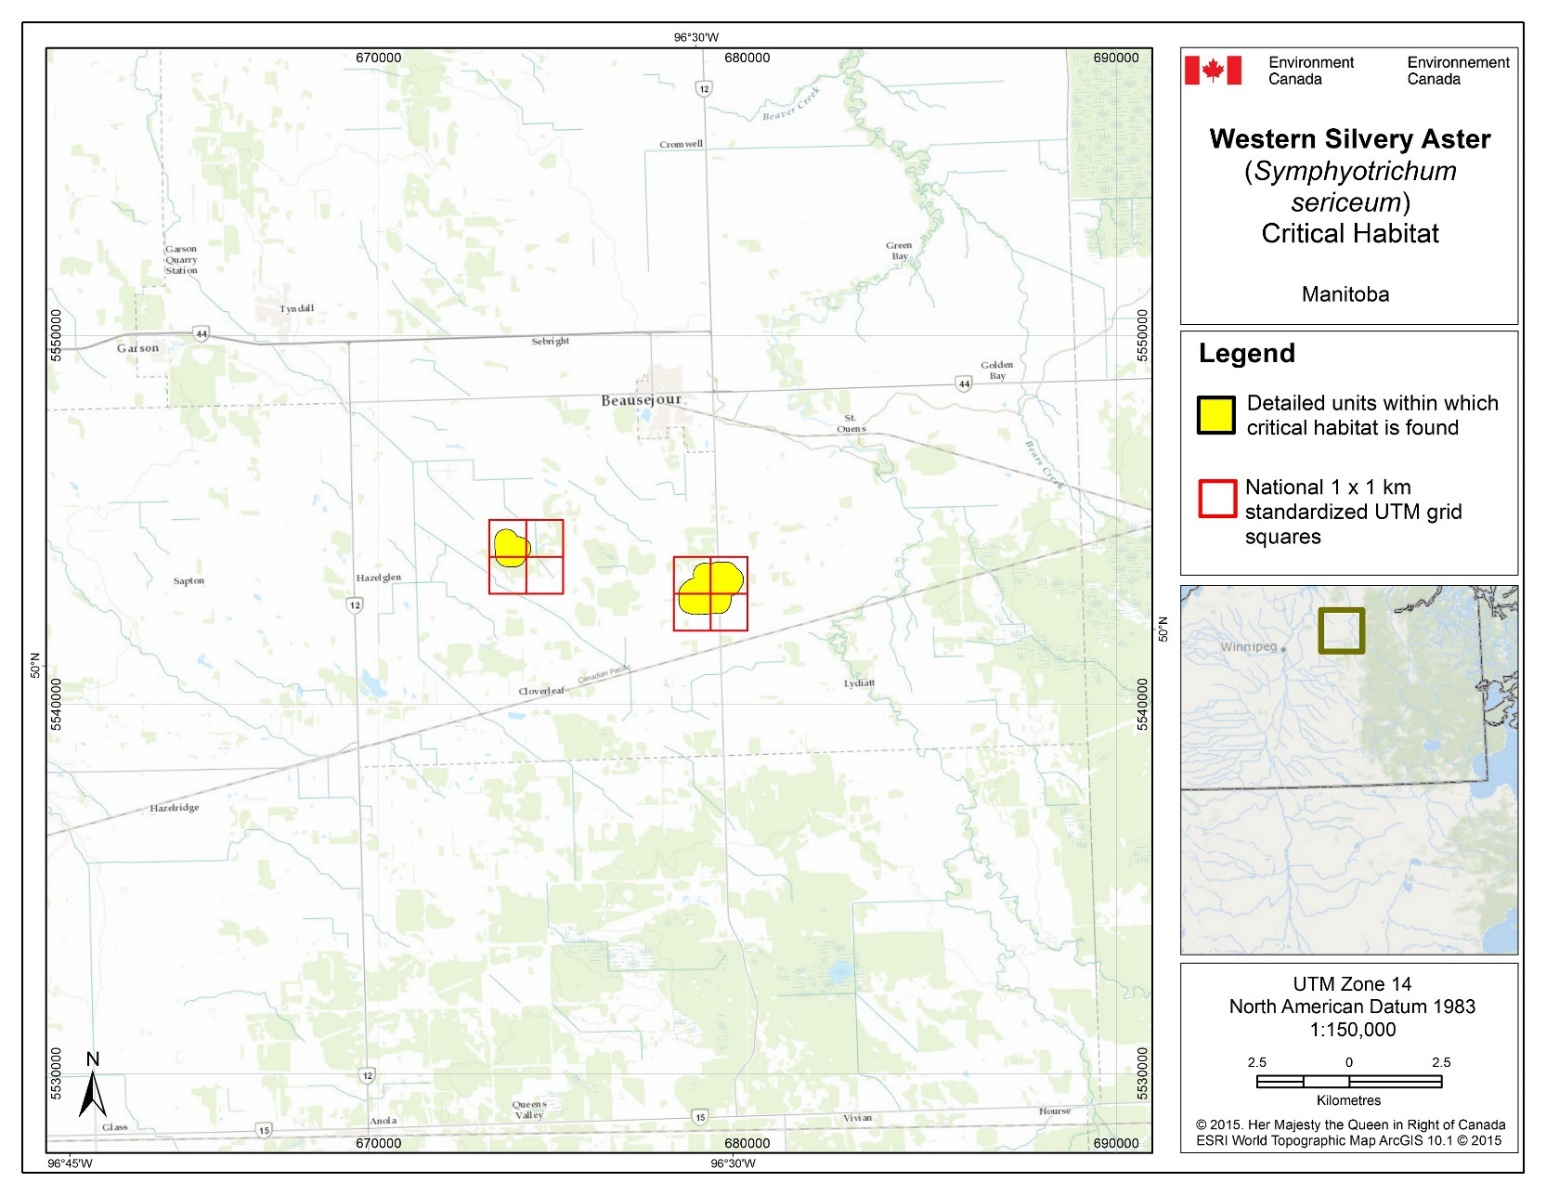 Figure B6: Map of Critical habitat for Western Silvery Aster in Manitoba